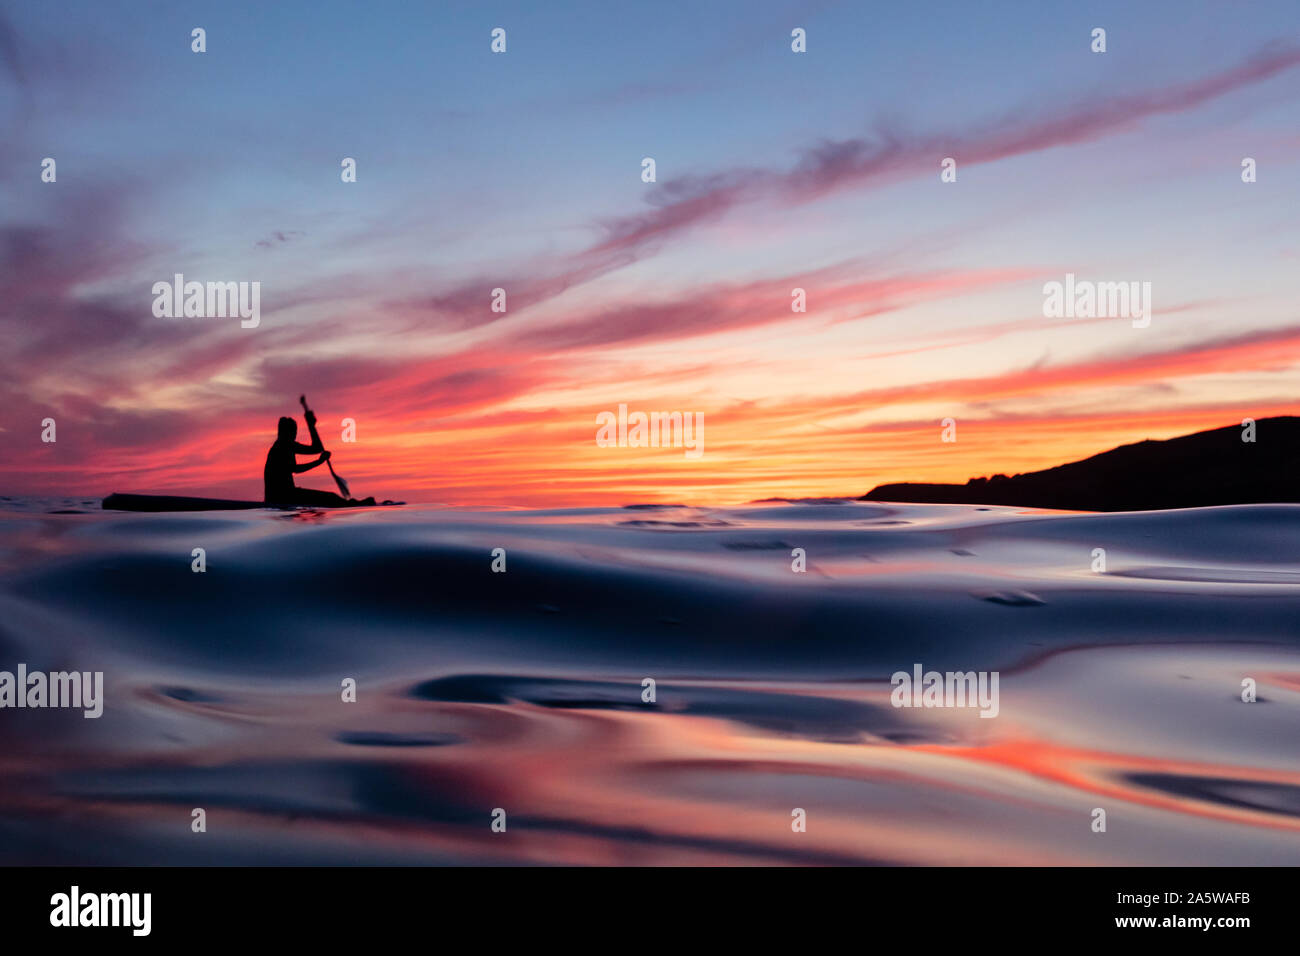 A woman paddles across the ocean surface reflecting vibrant sunset afterglow from colorful clouds. Stock Photo